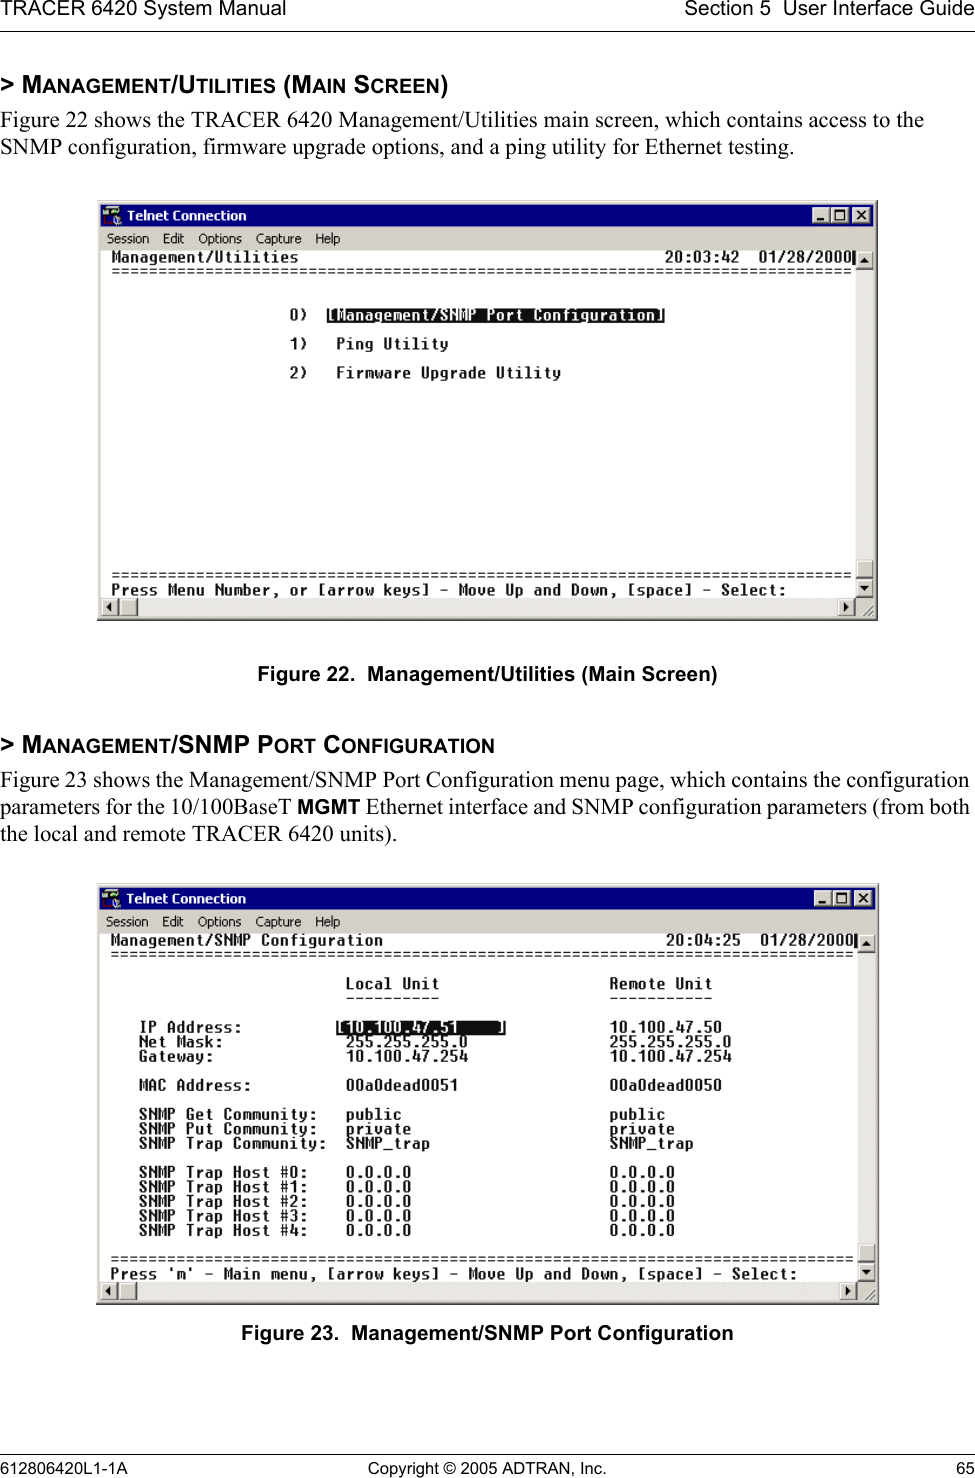 TRACER 6420 System Manual Section 5  User Interface Guide612806420L1-1A Copyright © 2005 ADTRAN, Inc. 65&gt; MANAGEMENT/UTILITIES (MAIN SCREEN)Figure 22 shows the TRACER 6420 Management/Utilities main screen, which contains access to the SNMP configuration, firmware upgrade options, and a ping utility for Ethernet testing.Figure 22.  Management/Utilities (Main Screen)&gt; MANAGEMENT/SNMP PORT CONFIGURATIONFigure 23 shows the Management/SNMP Port Configuration menu page, which contains the configuration parameters for the 10/100BaseT MGMT Ethernet interface and SNMP configuration parameters (from both the local and remote TRACER 6420 units). Figure 23.  Management/SNMP Port Configuration